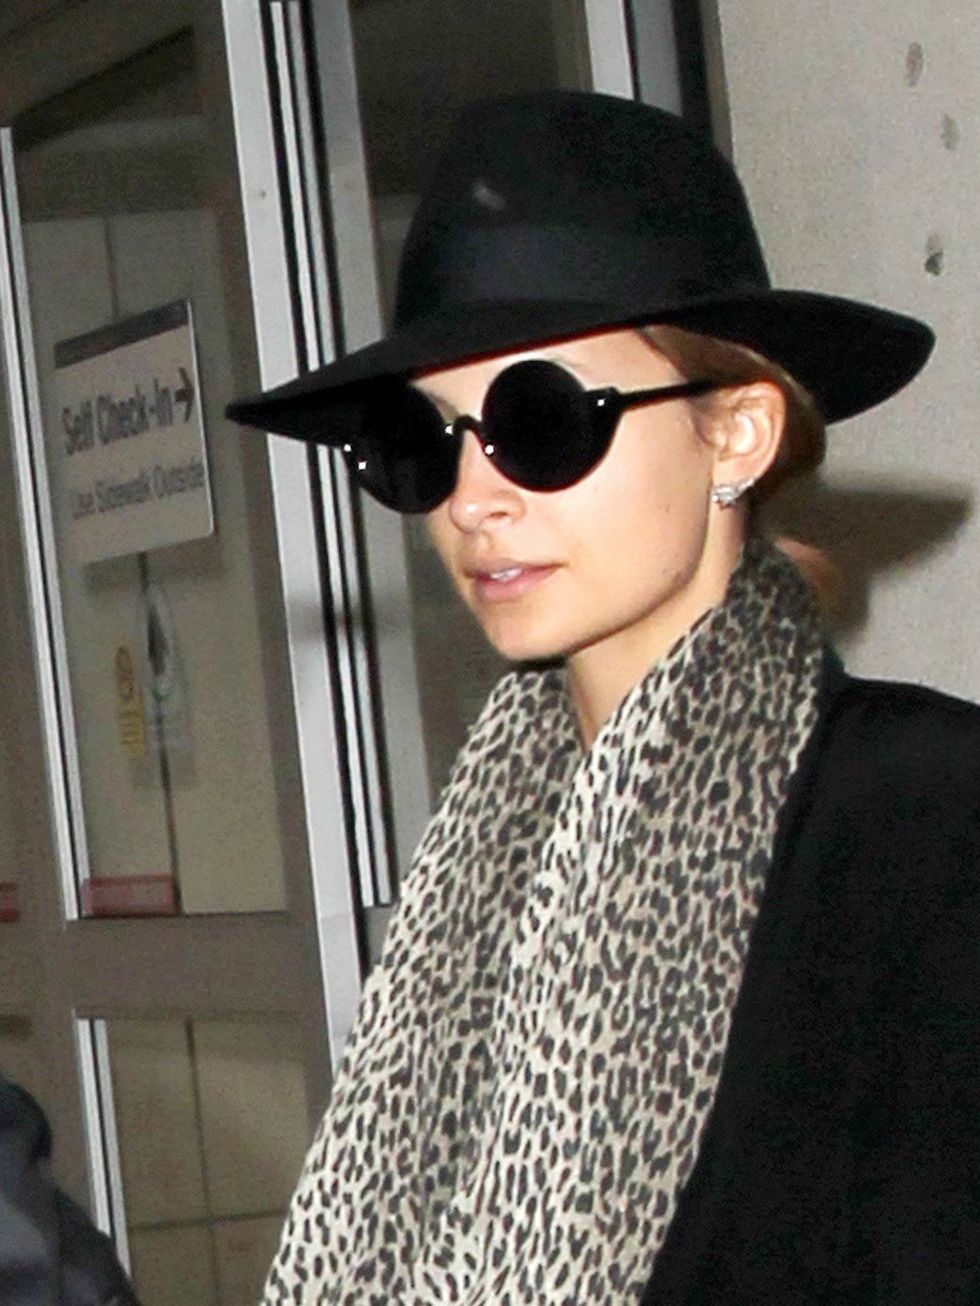 <p><a href="http://www.elleuk.com/star-style/celebrity-style-files/nicole-richie">Nicole Richie</a> sticks to a monochrome palette as she arrives at LAX airport, teaming a wide-brimmed hat with sunglasses and a patterned scarf.</p>